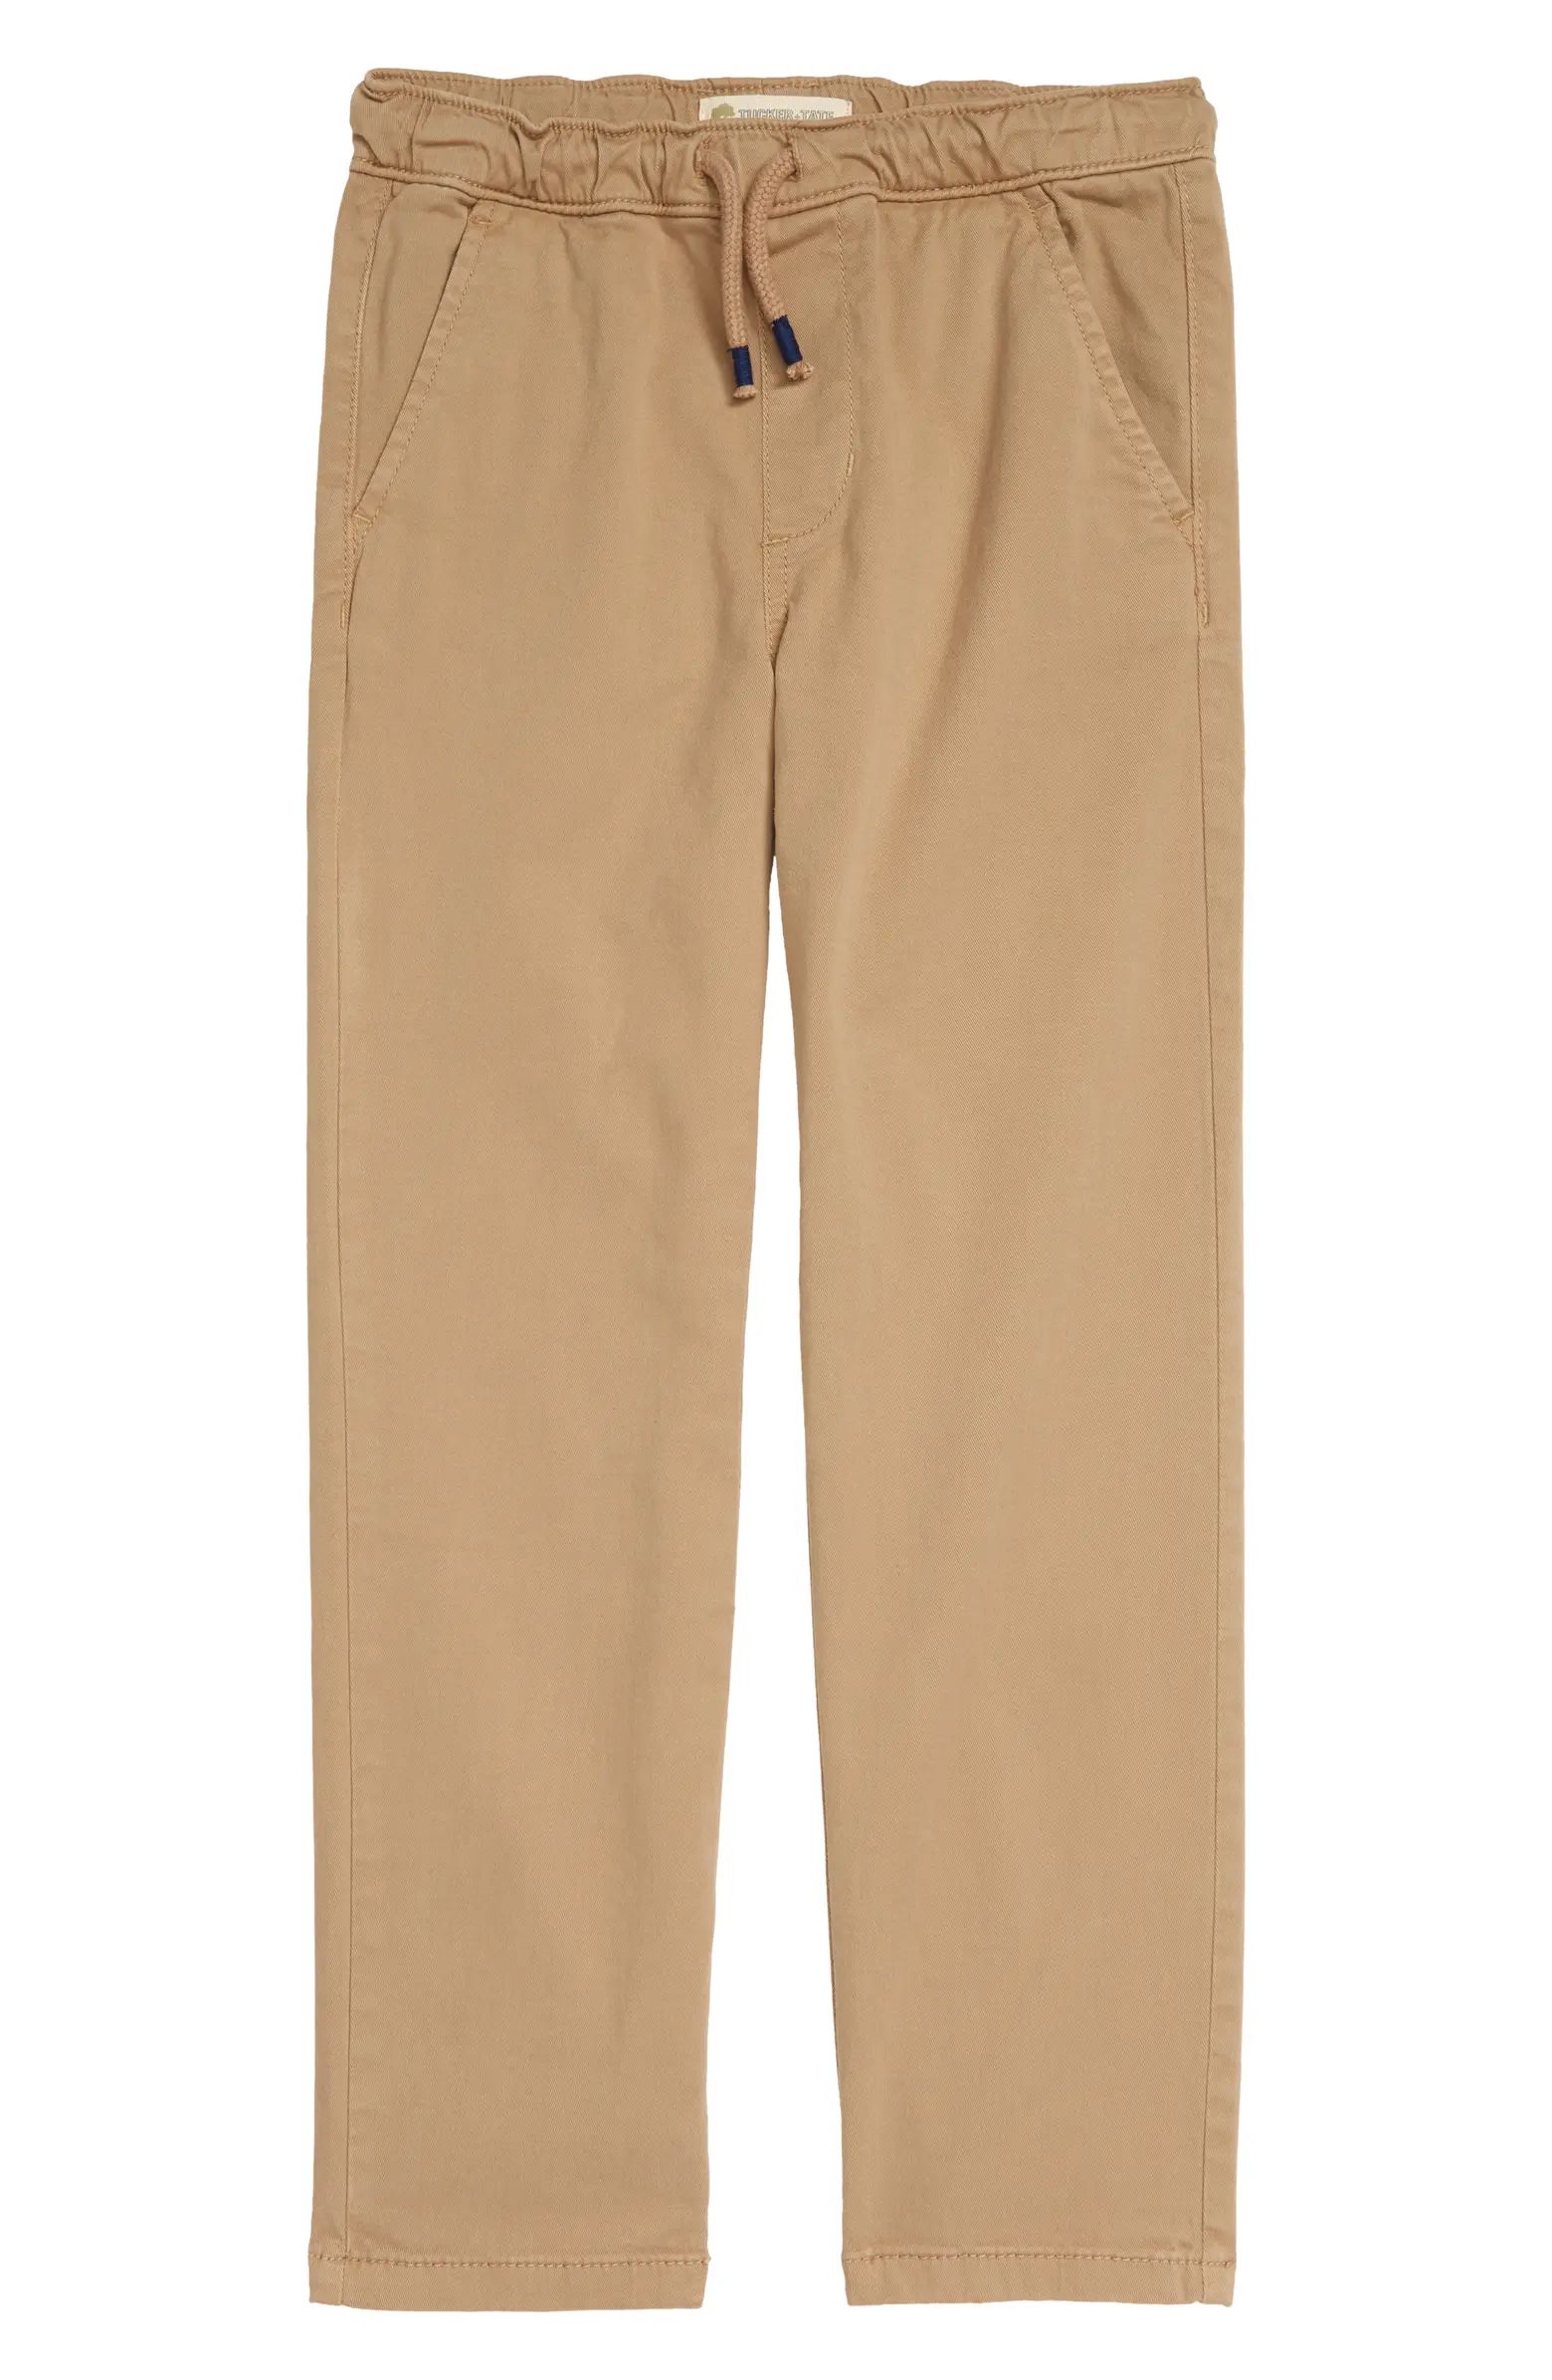 Tucker + Tate Kids' All Day Relaxed Pants | Nordstrom | Nordstrom